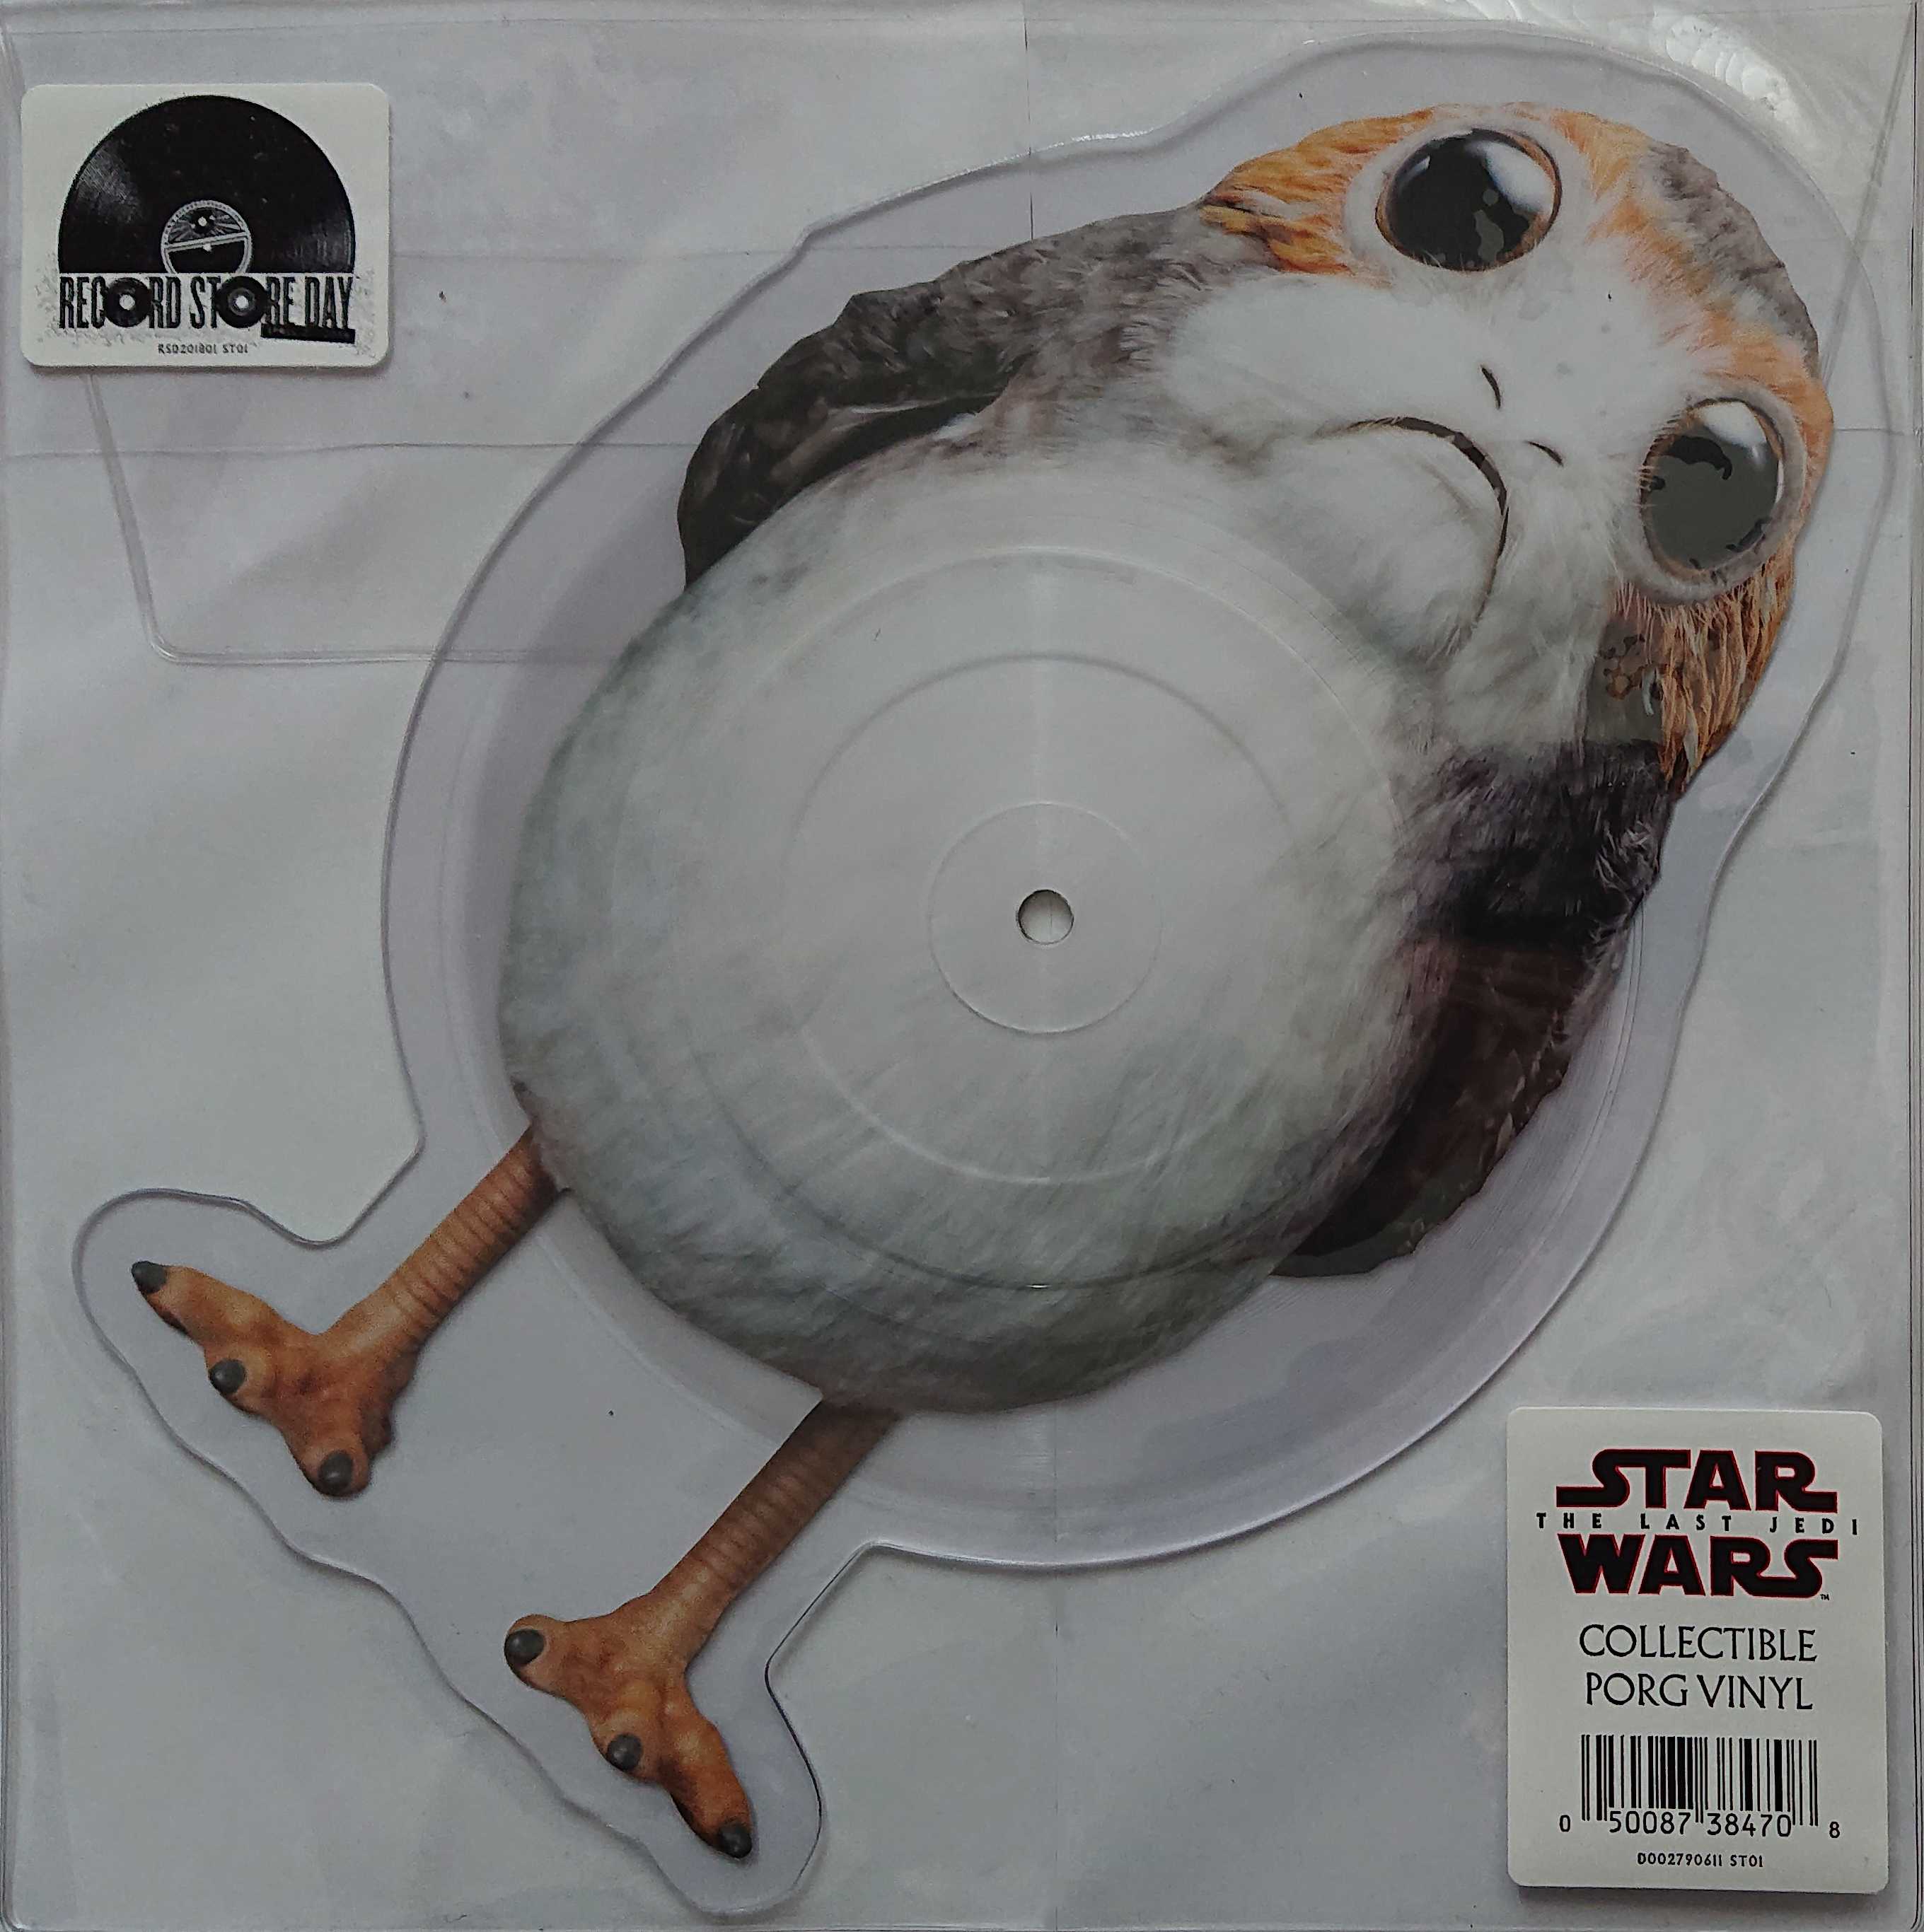 Picture of Star Wars: The Last Jedi(Record store day 2018) by artist John Williams from ITV, Channel 4 and Channel 5 singles library